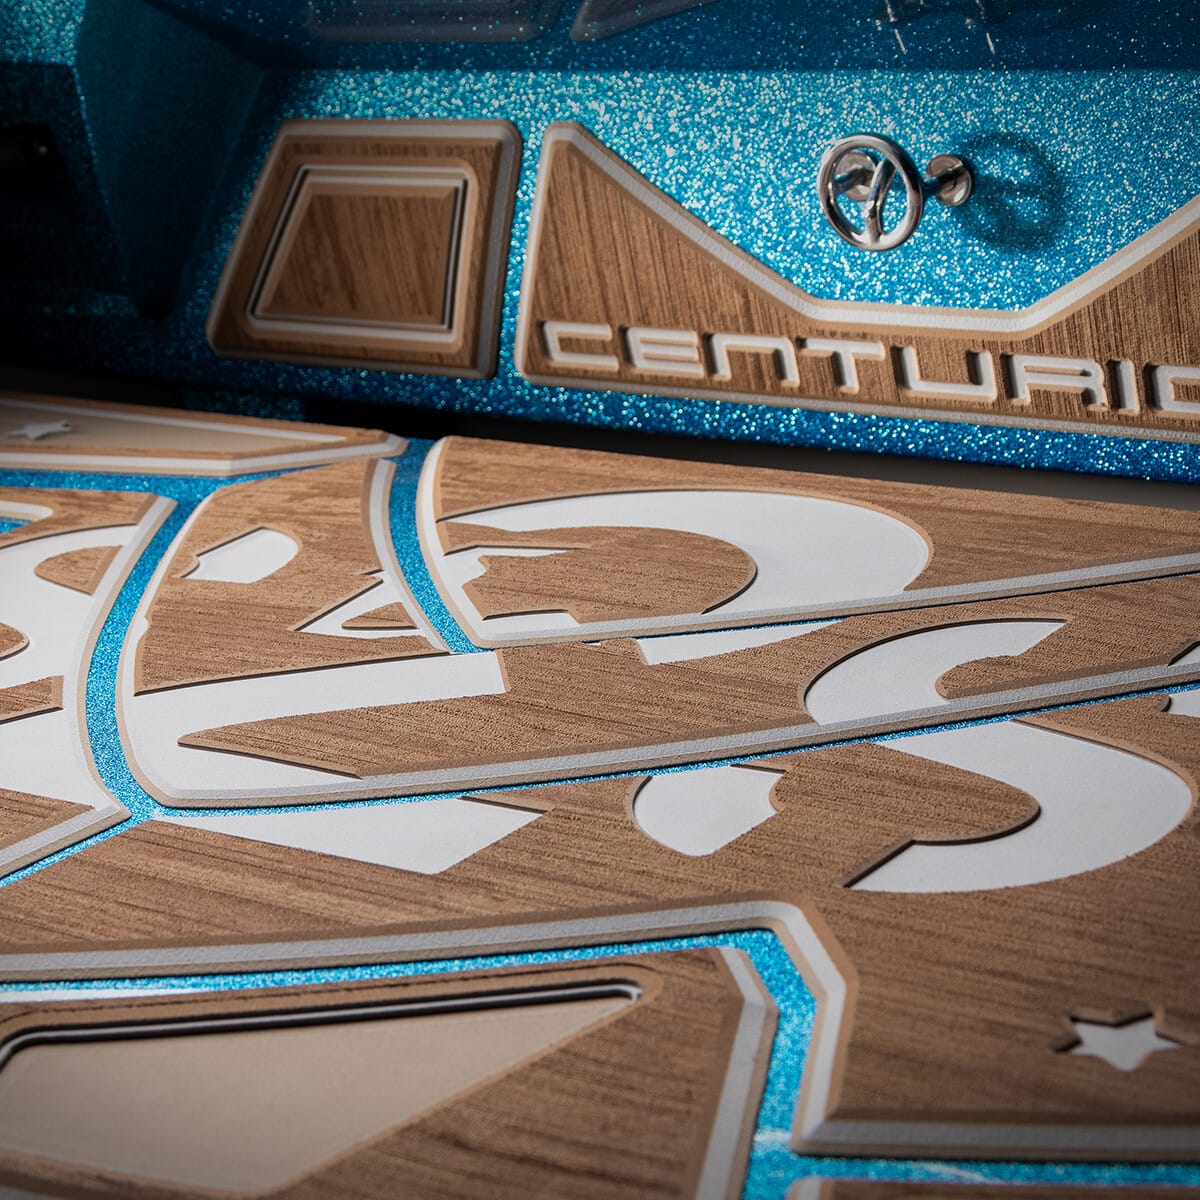 Close-up of a Centurion logo on a boat with a detailed wooden design and blue metal accents.